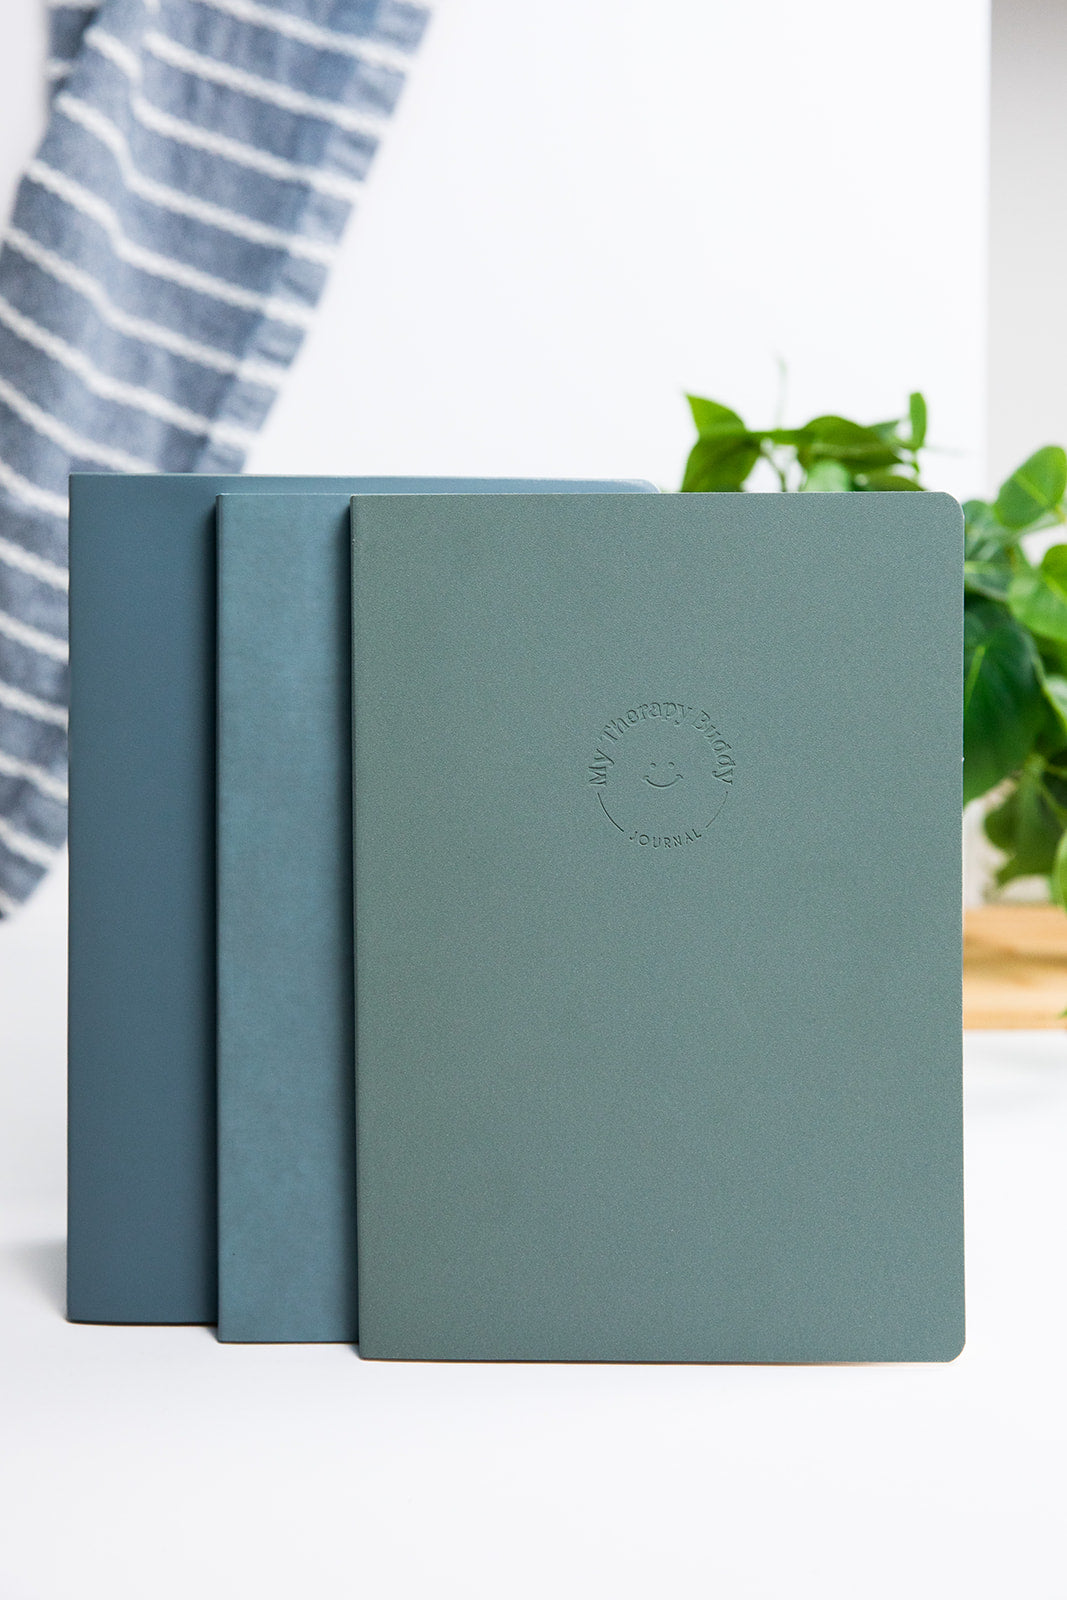 Journal bundle in Green with Envy